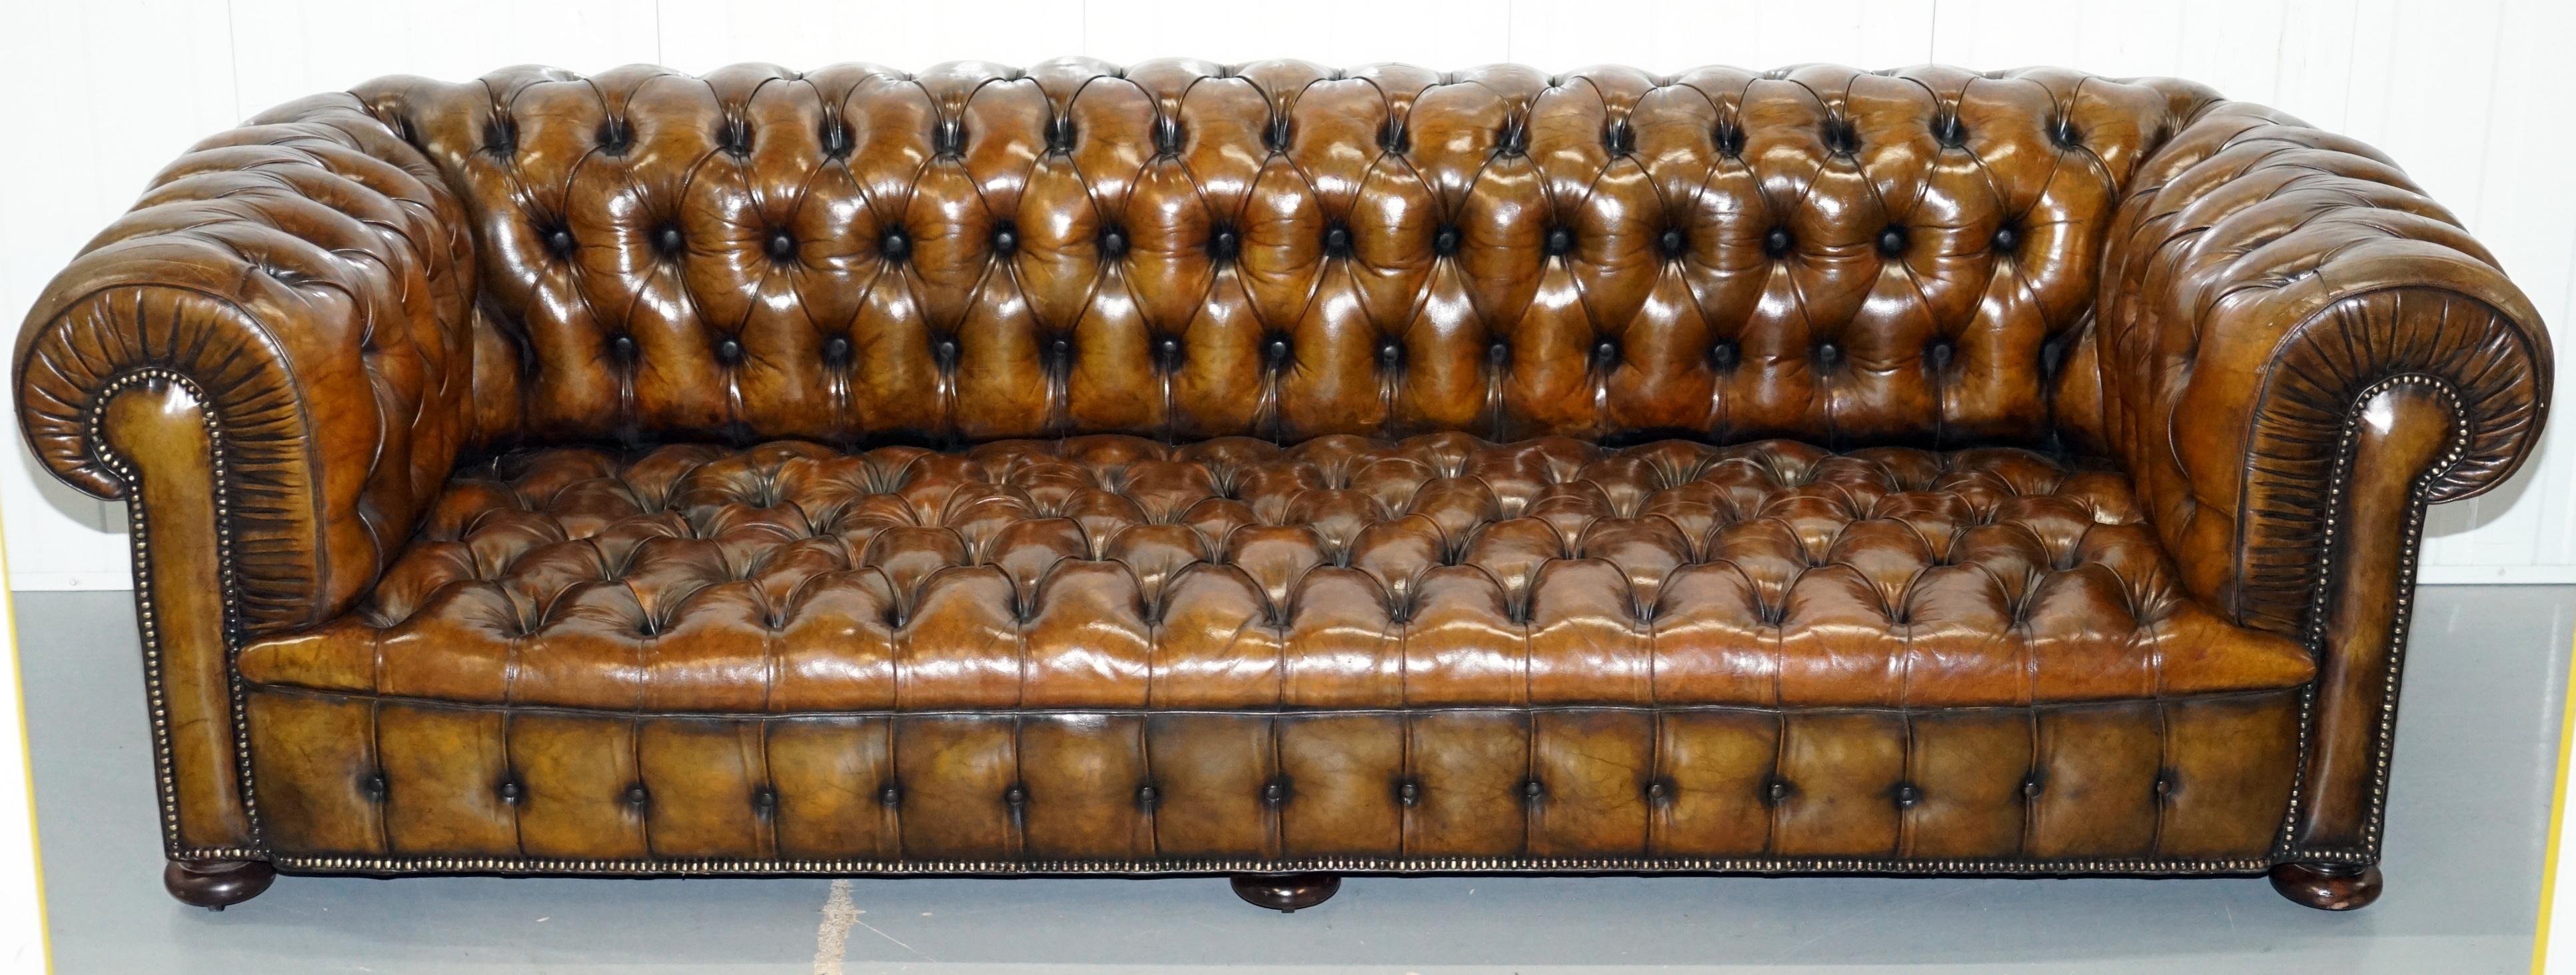 We are delighted to offer for sale this stunning exceptionally rare huge original early Victorian tobacco brown leather fully restored Chesterfield buttoned sofa

This is the model that everyone wants, it is the 100% perfect and correct oversized